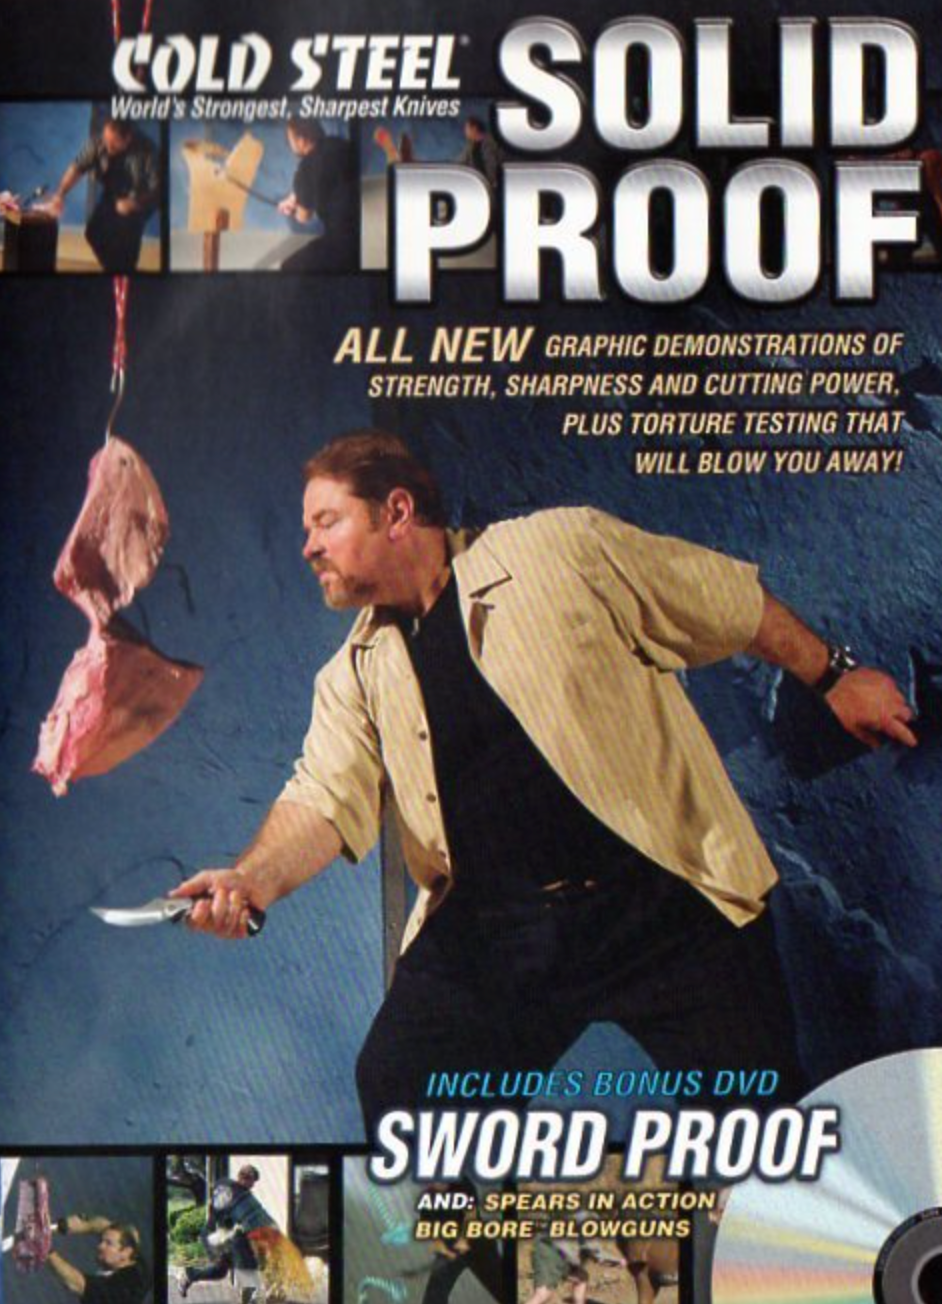 Solid Proof & Sword Proof 2 DVD Set by Cold Steel